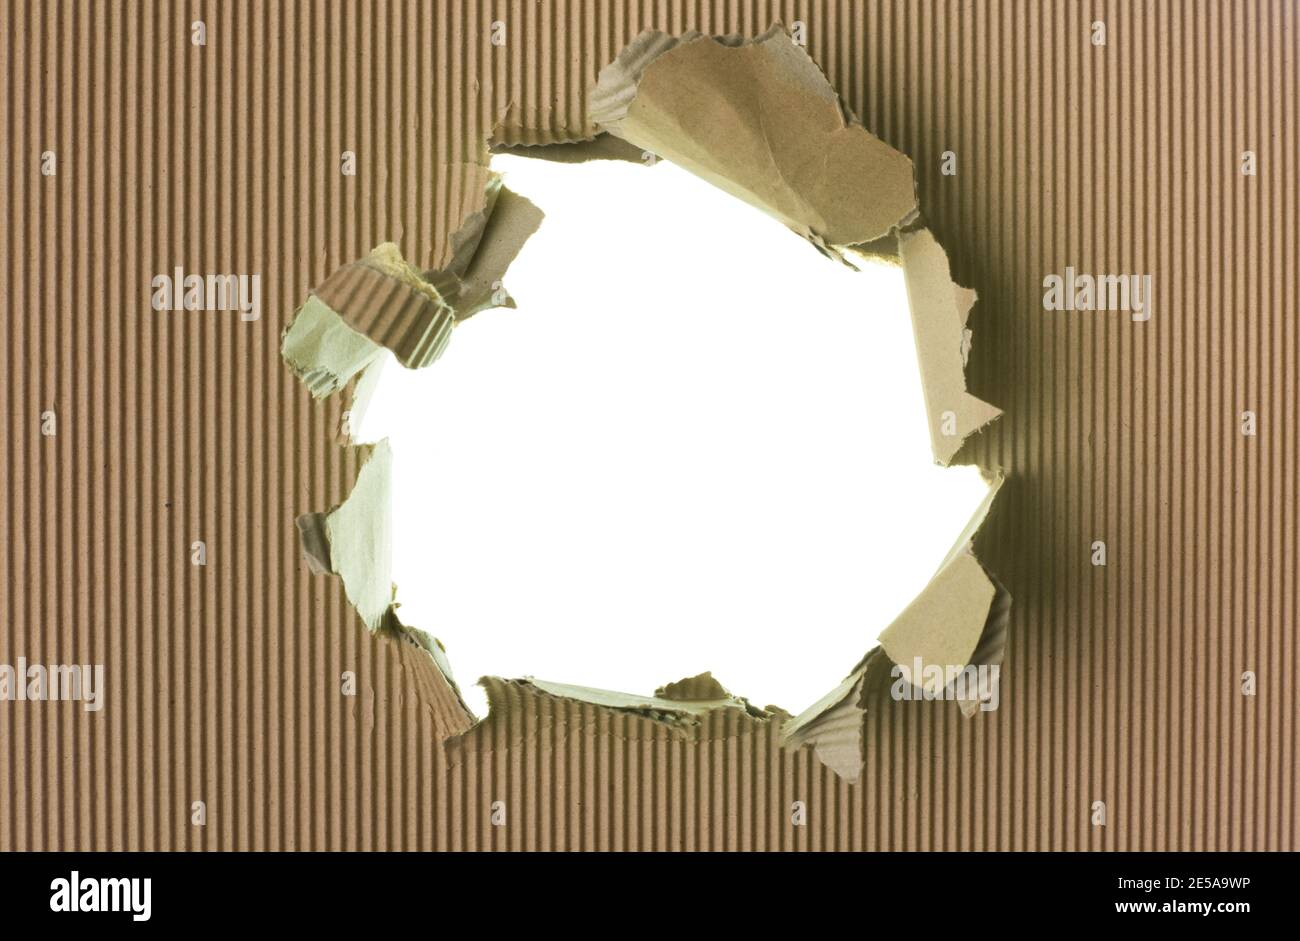 Ripped brown paper background, big hole Stock Photo